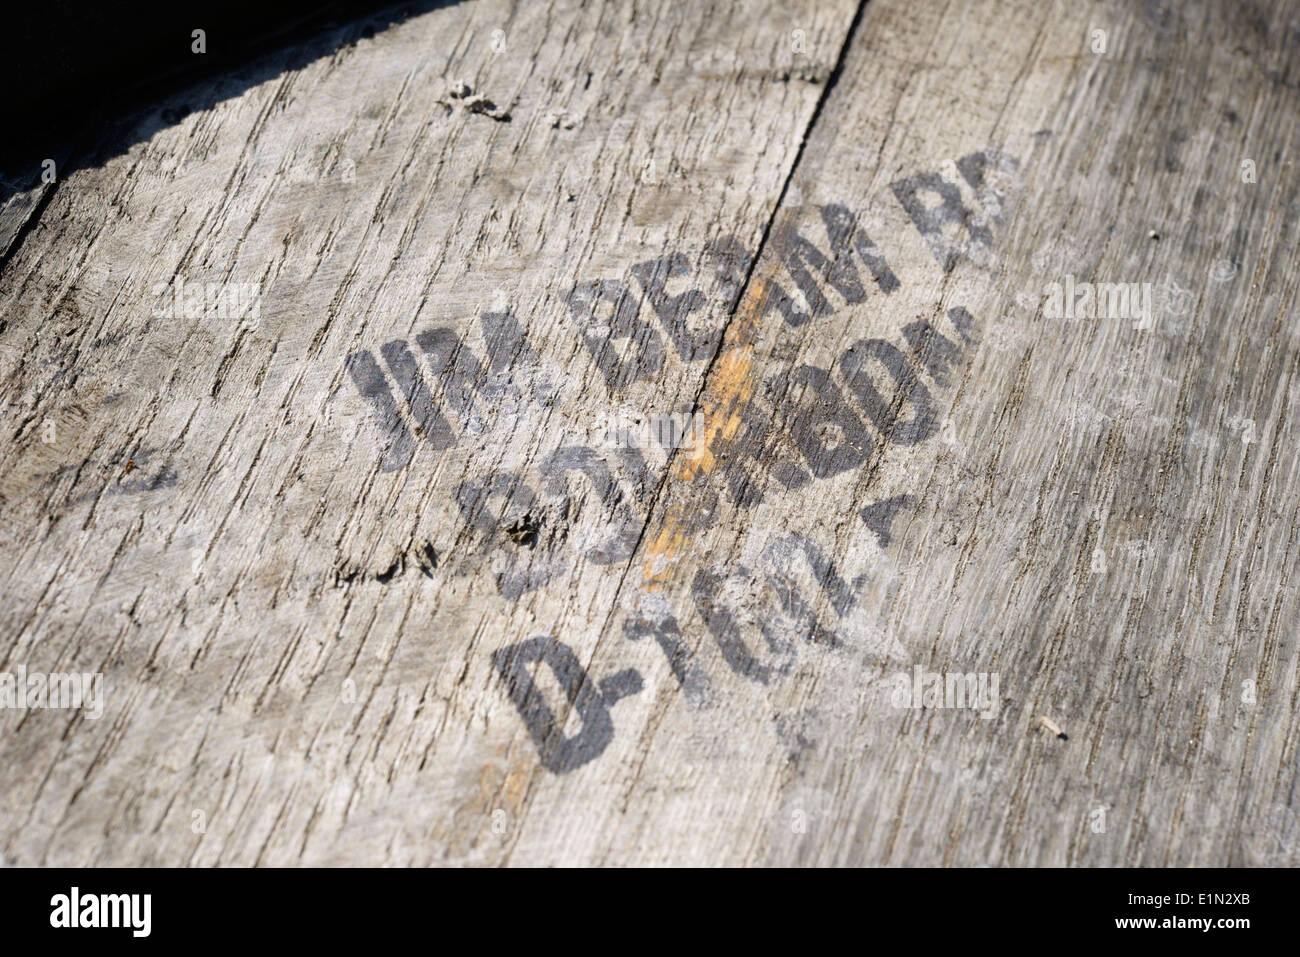 Stencilled text on an old Whisky barrel - Jim Beam Bourbon. Stock Photo